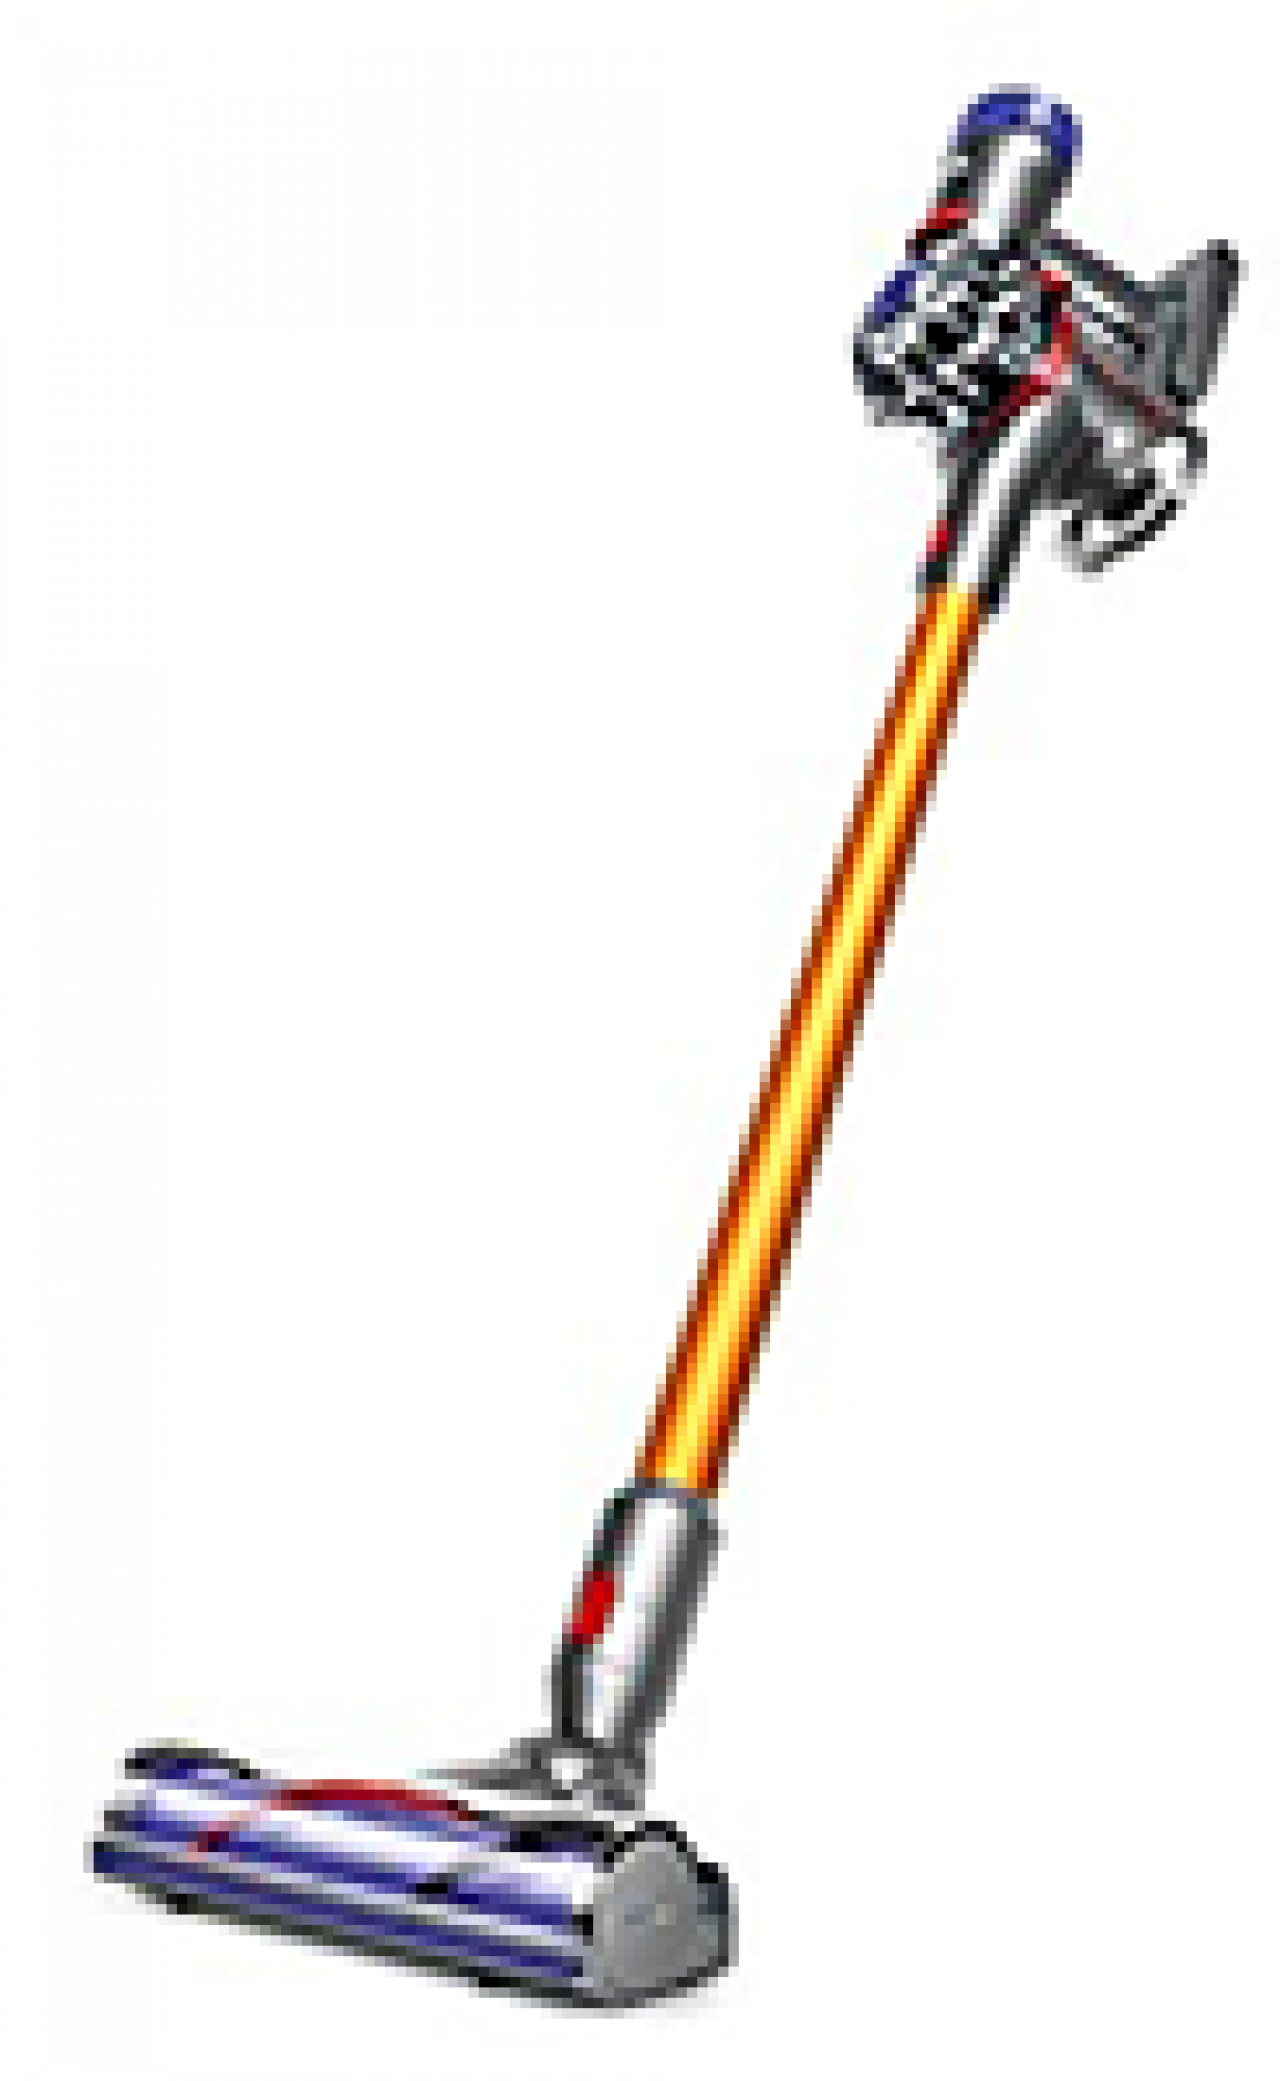 Dyson V8 was the defacto cordless vacuum for a long time